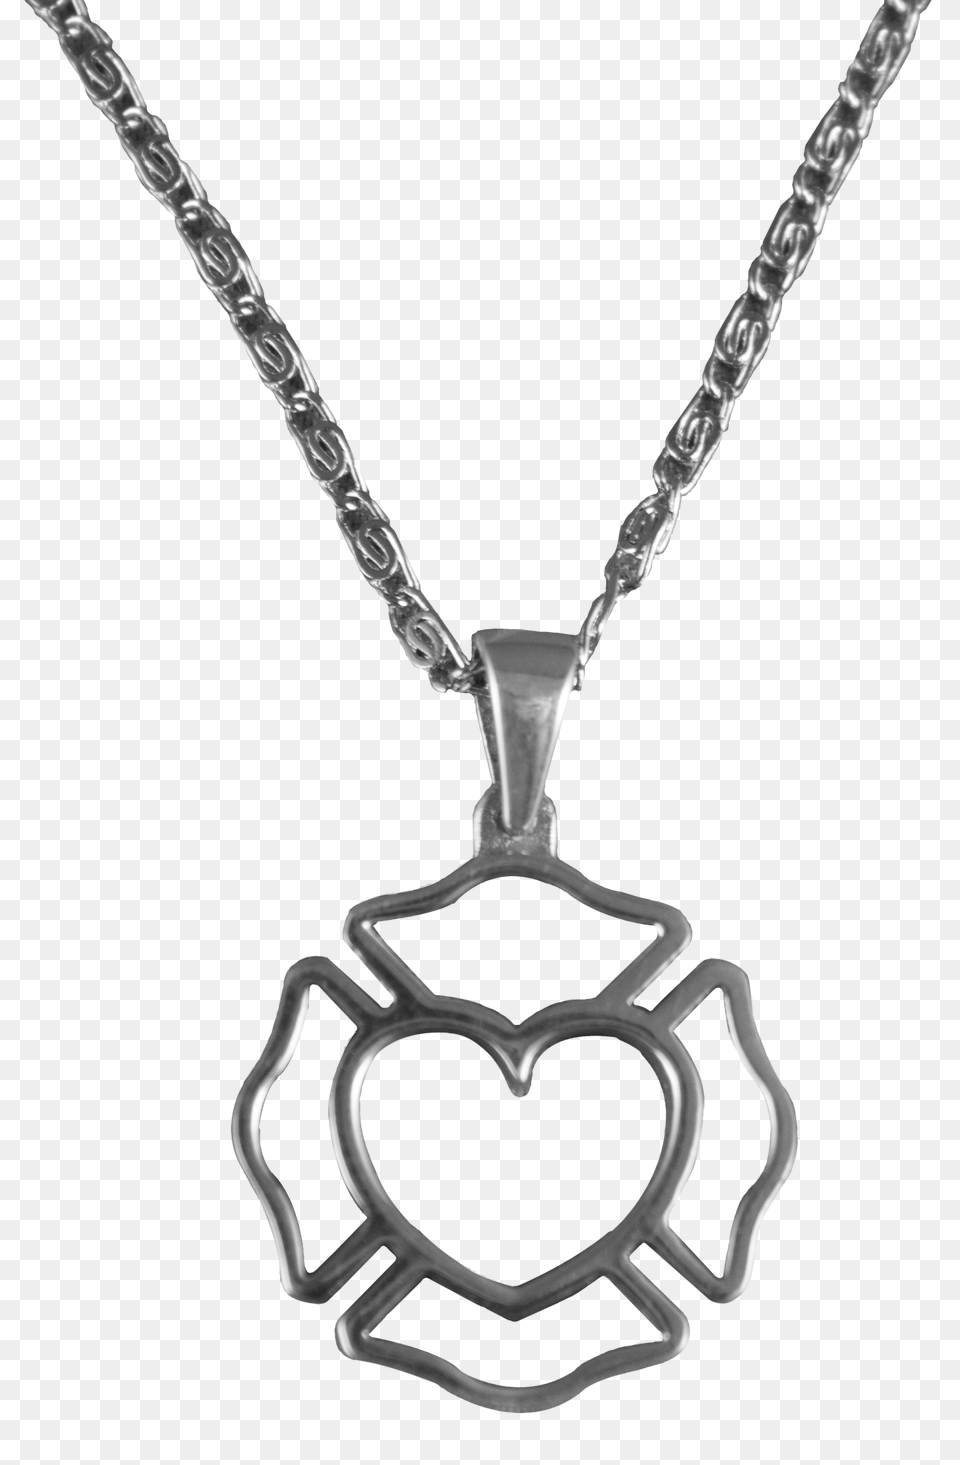 Maltese Cross Outline With Heart Necklace, Accessories, Jewelry, Pendant, Smoke Pipe Png